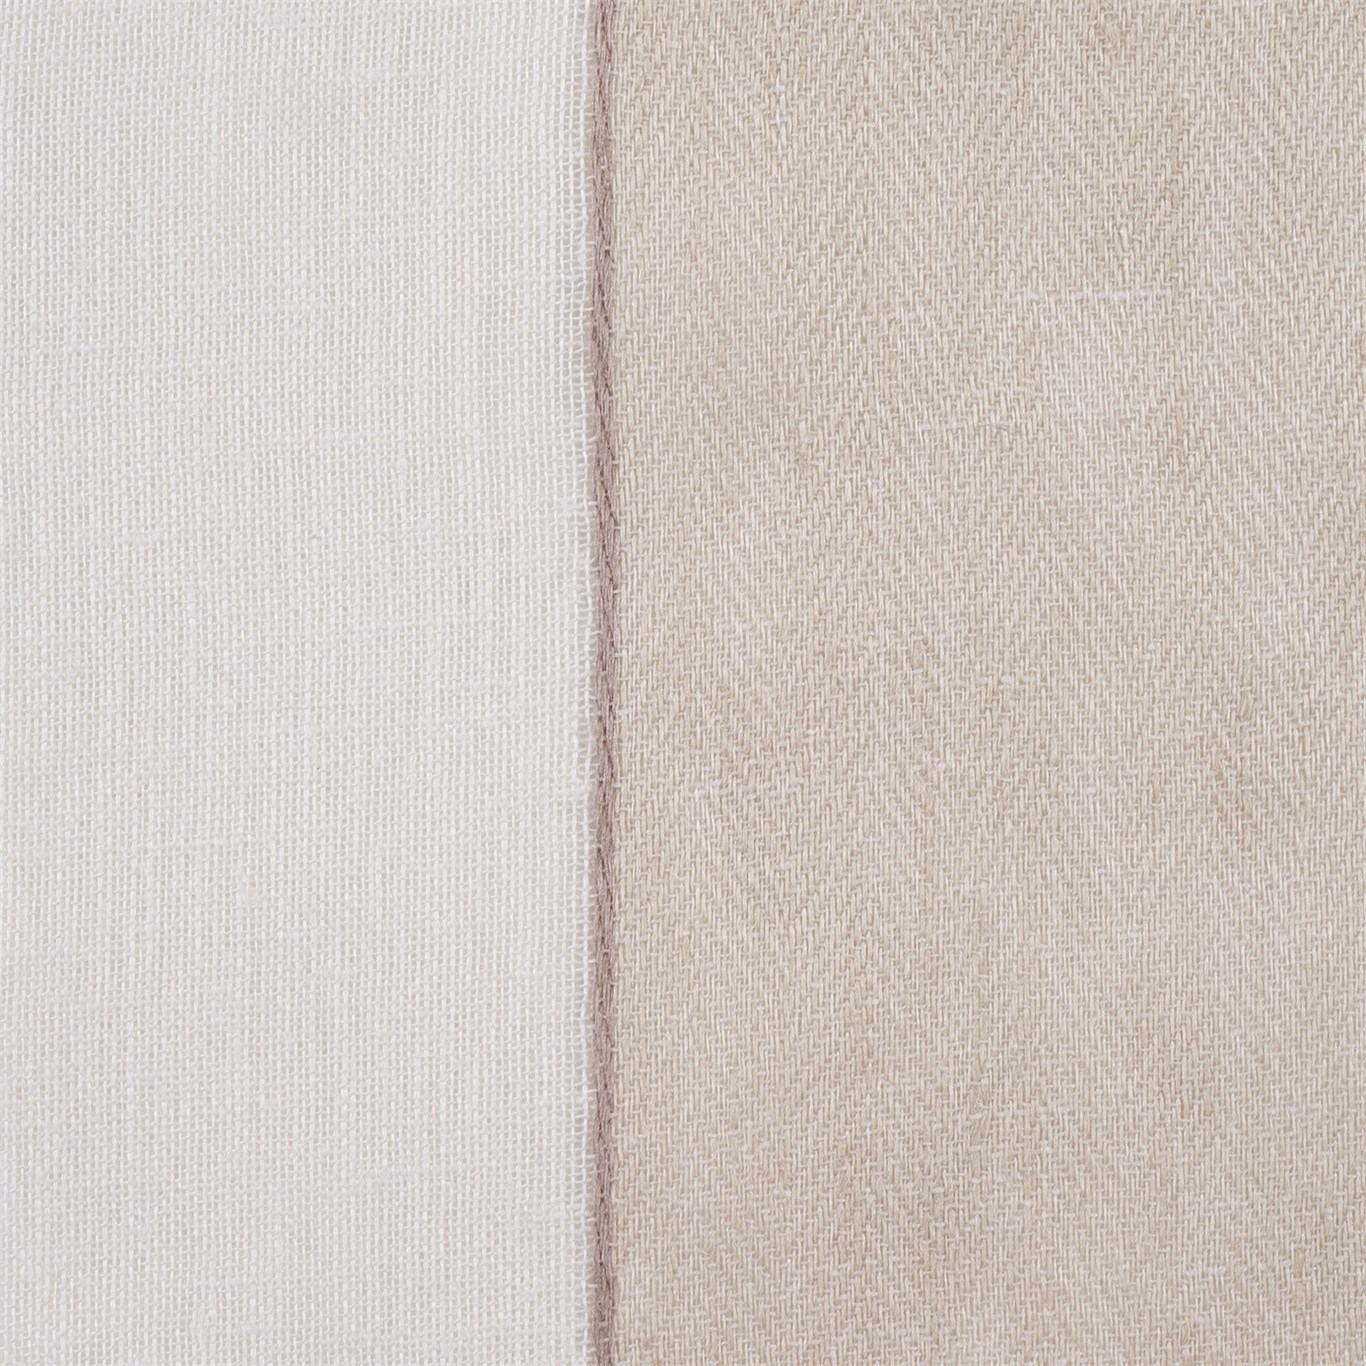 Purity Voiles Hemp/Ivory Fabric by HAR